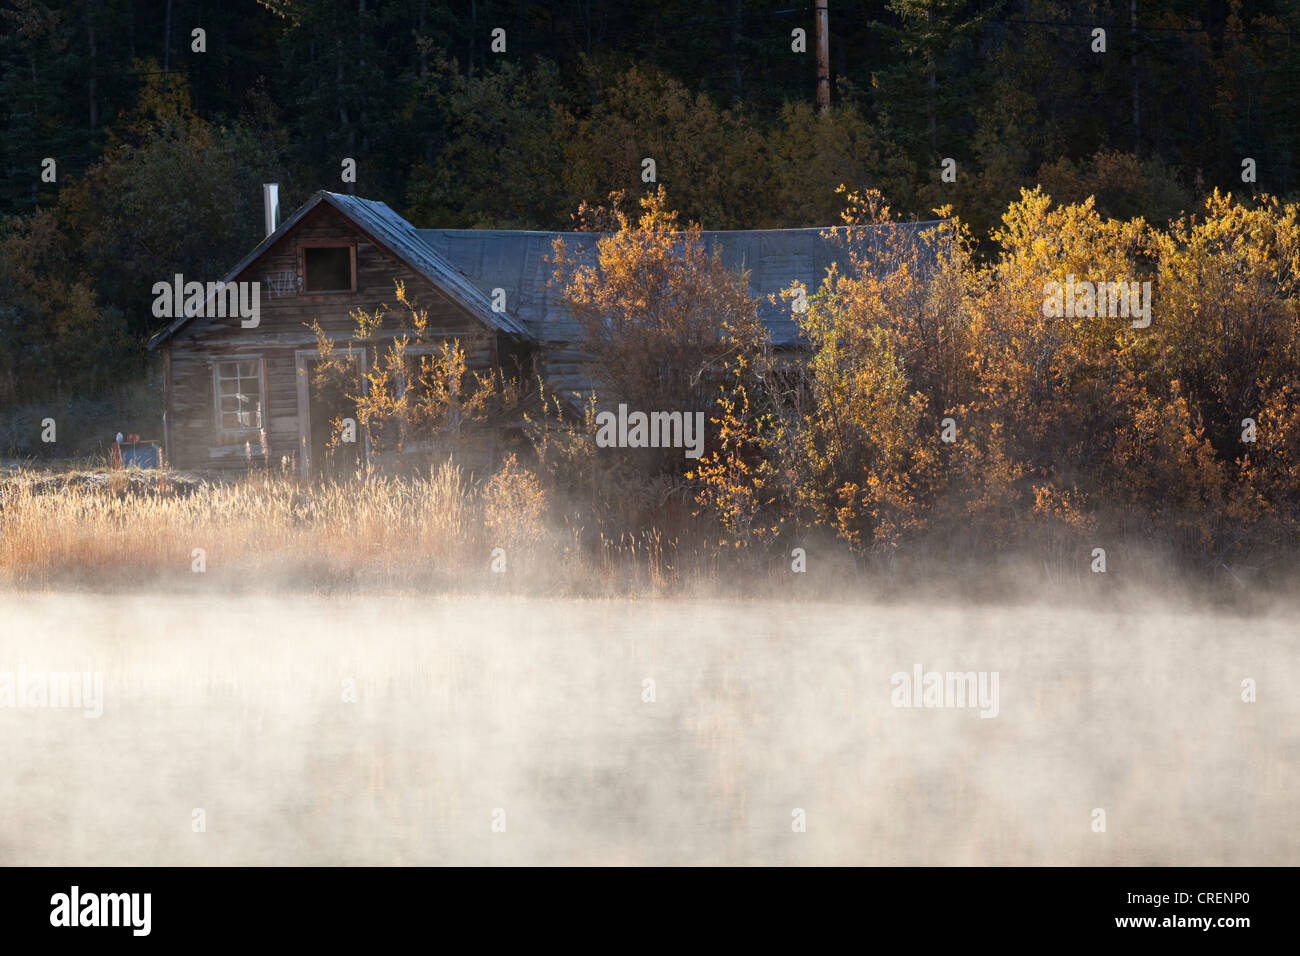 Old log cabin in Carcross, fog, steaming water, historic Chilkoot Pass, Chilkoot Trail, Indian summer, leaves in fall colours, Stock Photo